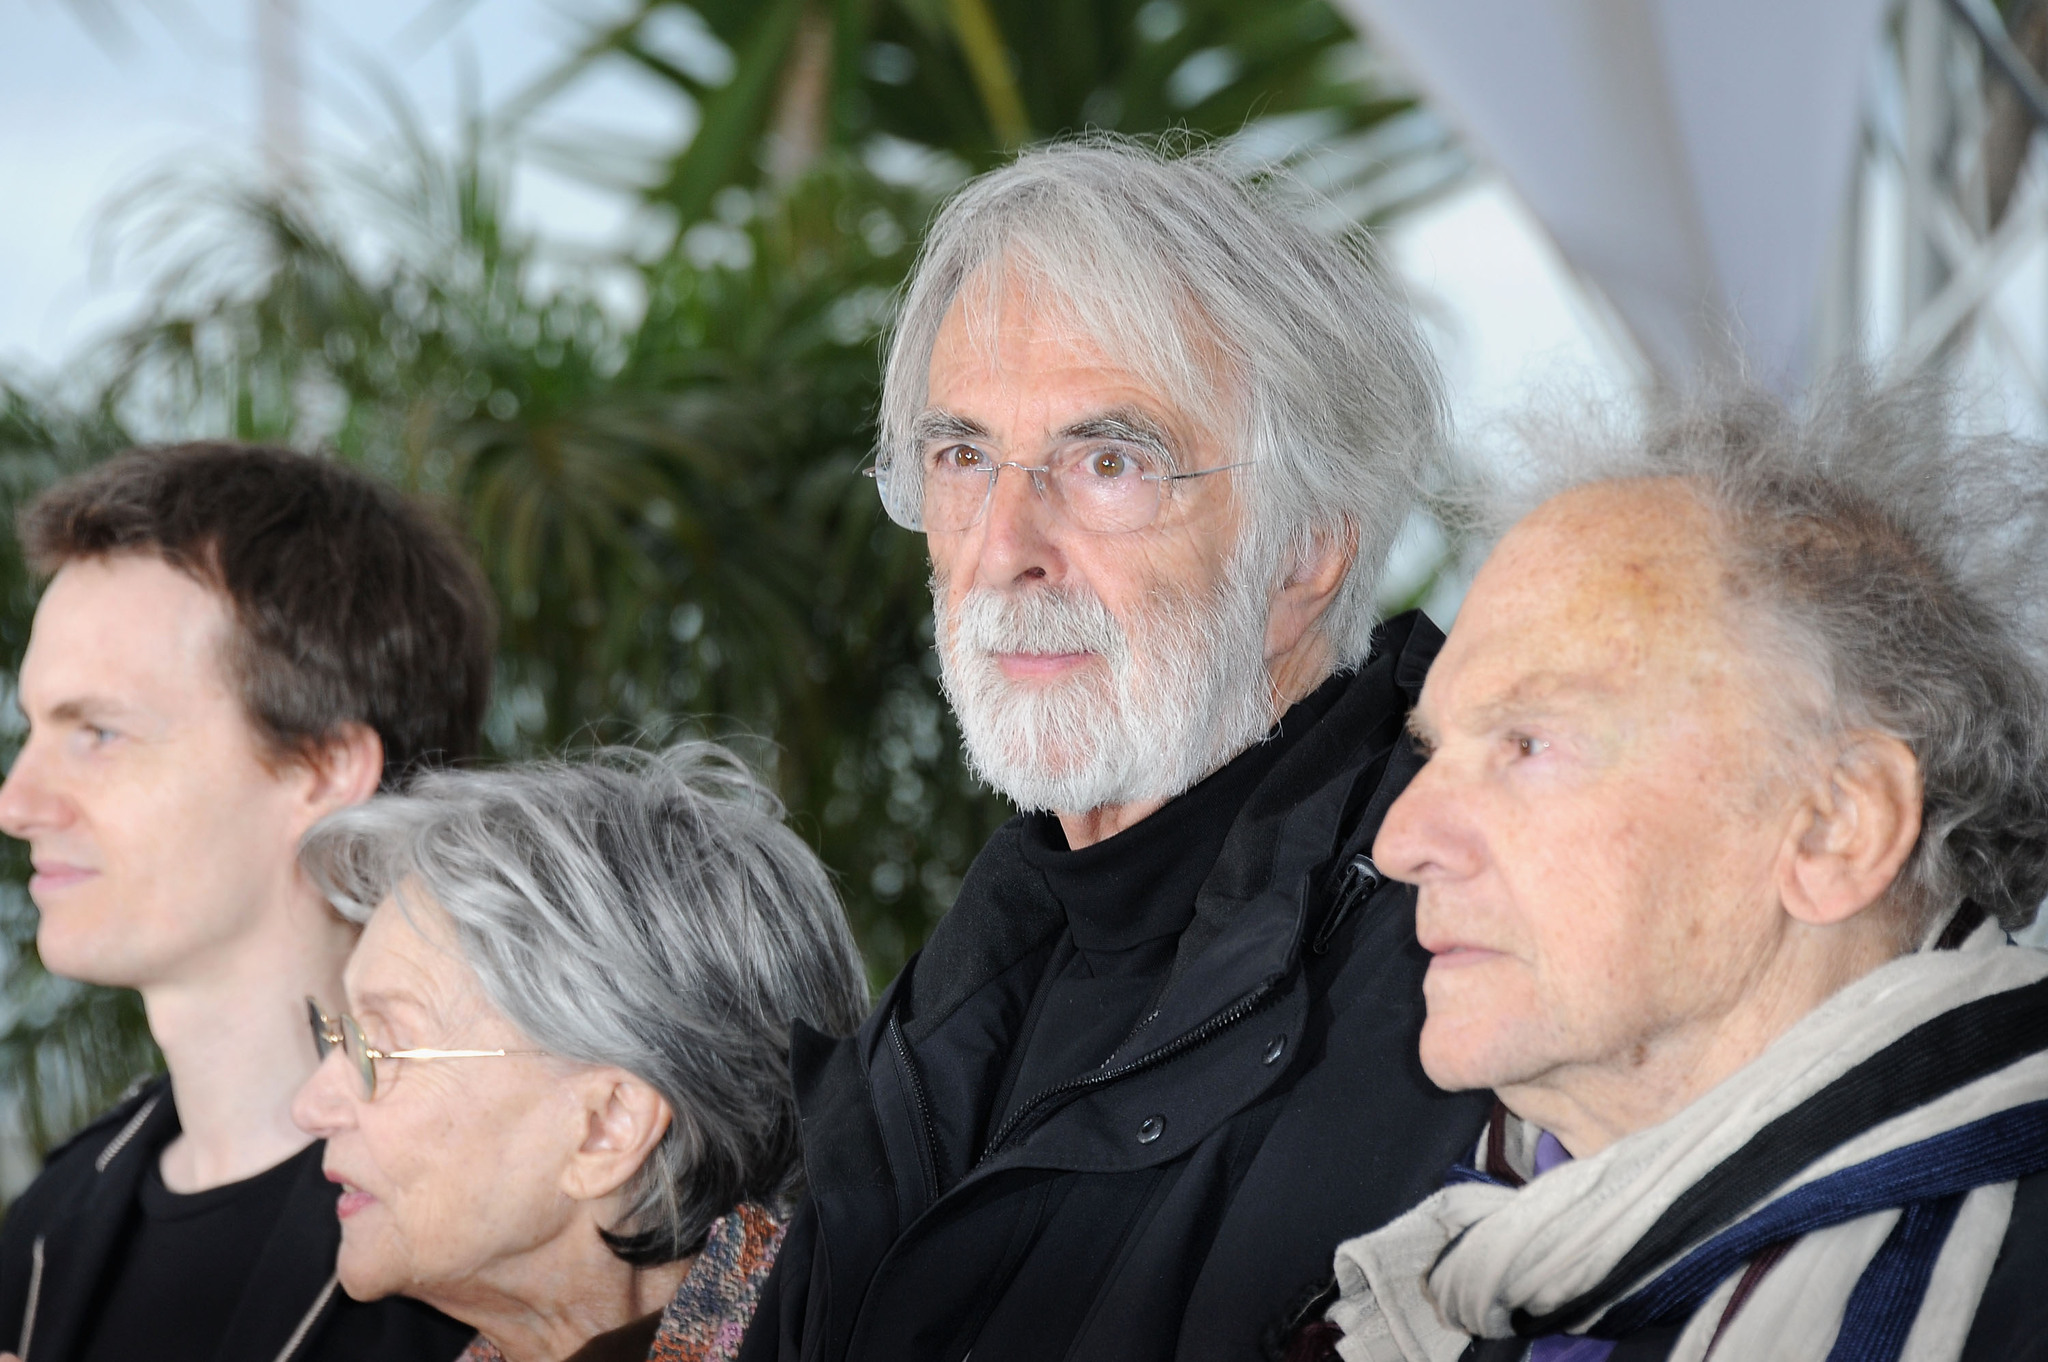 Jean-Louis Trintignant, Michael Haneke, Emmanuelle Riva and Alexandre Tharaud at event of Amour (2012)